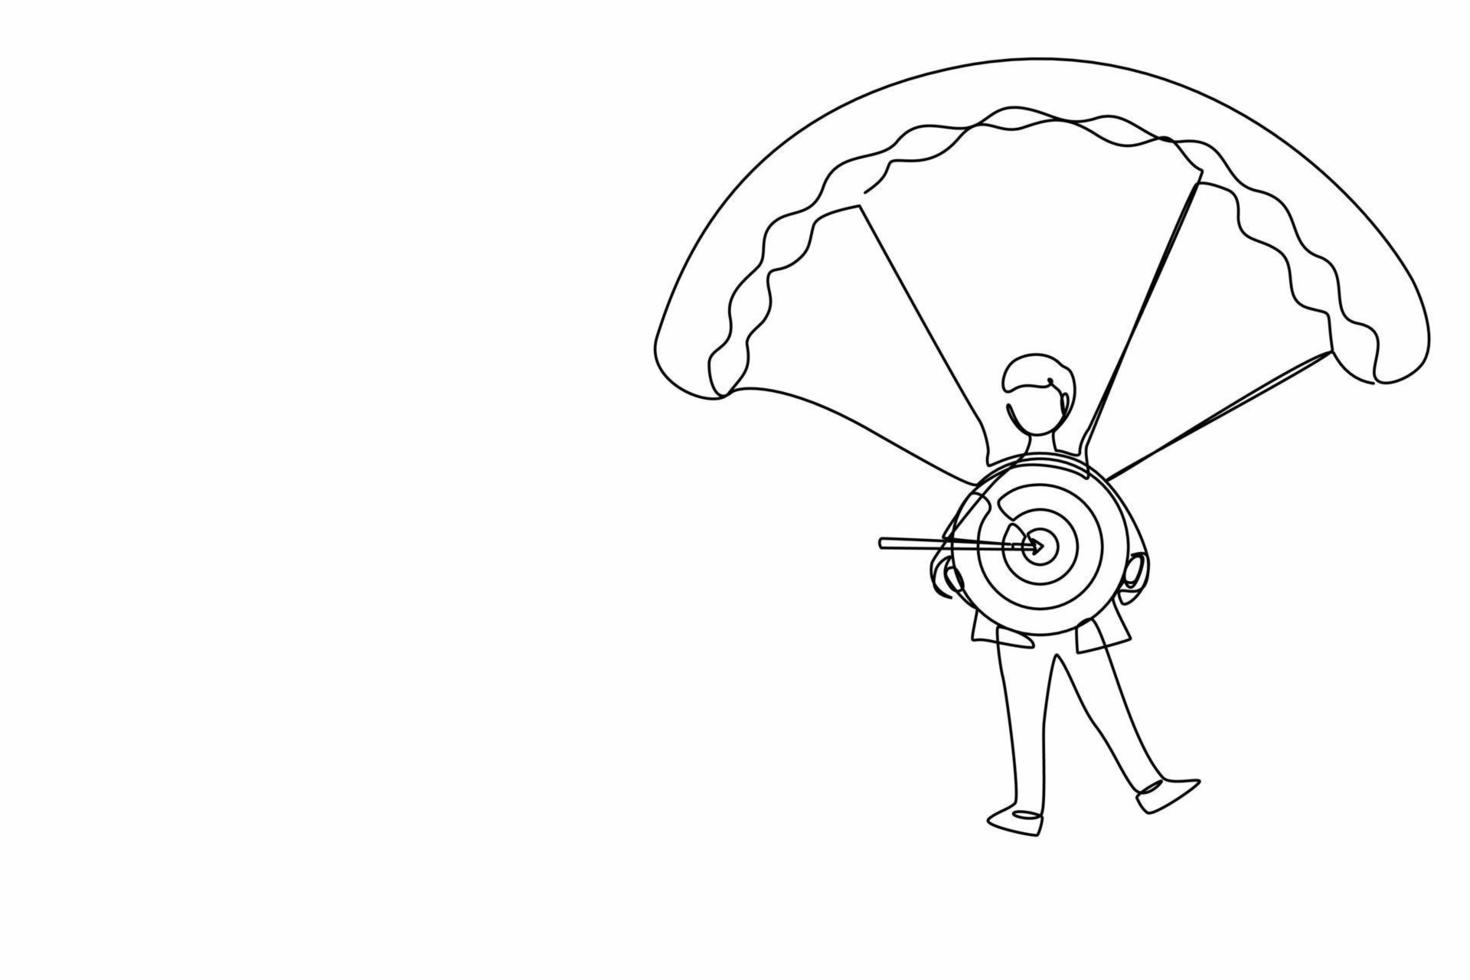 Single one line drawing businessman holding target with arrow in bullseye and jumping with parachute. Achievement and success. Business target concept. Continuous line draw design vector illustration